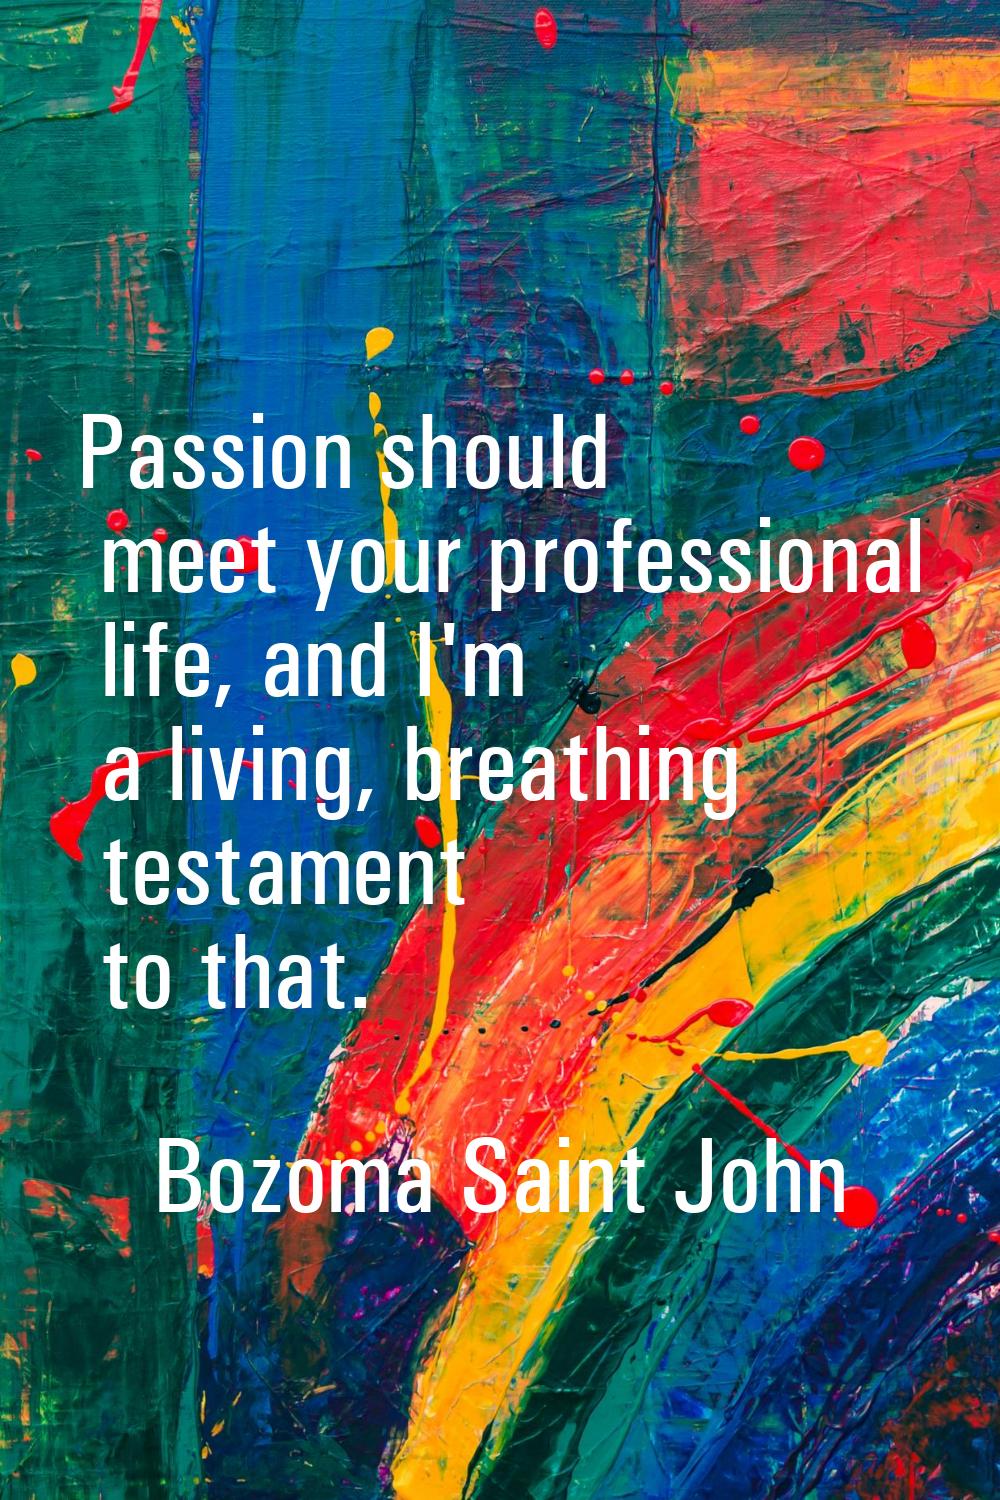 Passion should meet your professional life, and I'm a living, breathing testament to that.